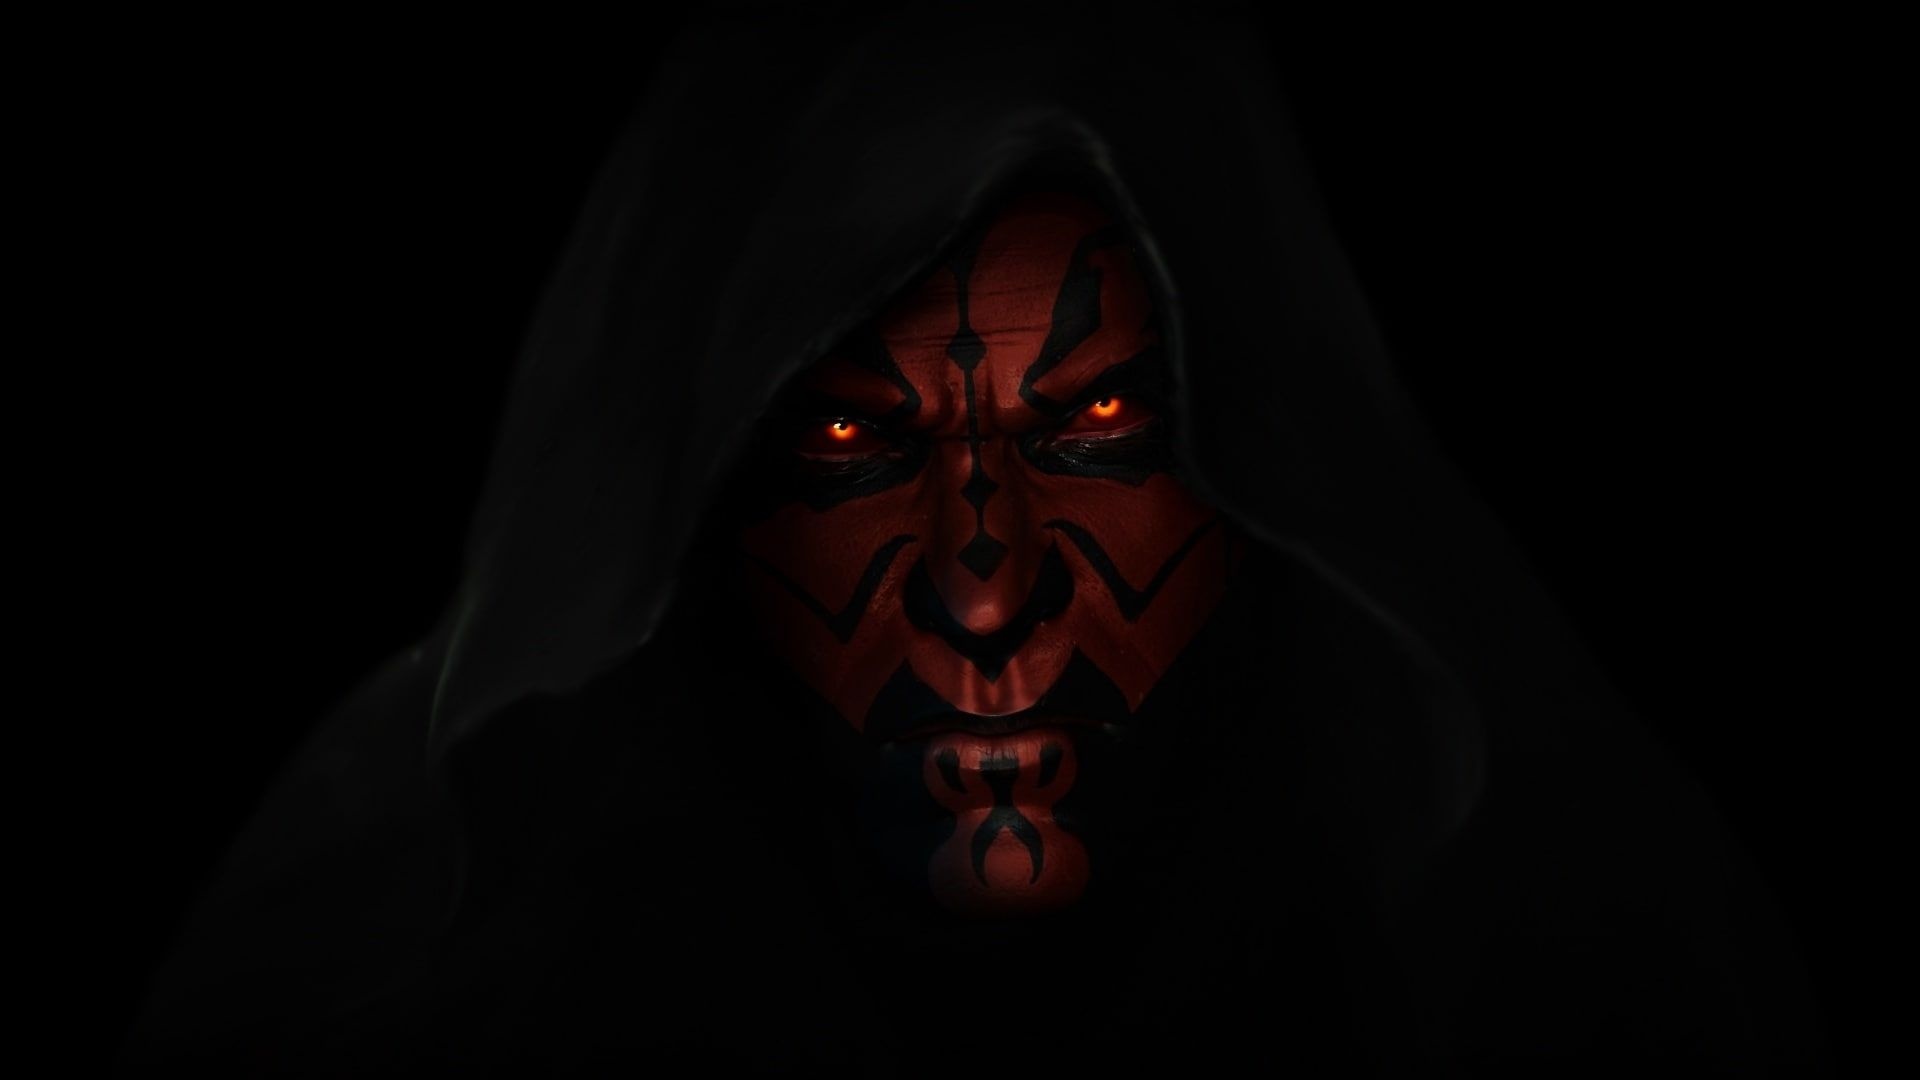 Sith: Maul, The dark side of the Force. 1920x1080 Full HD Wallpaper.